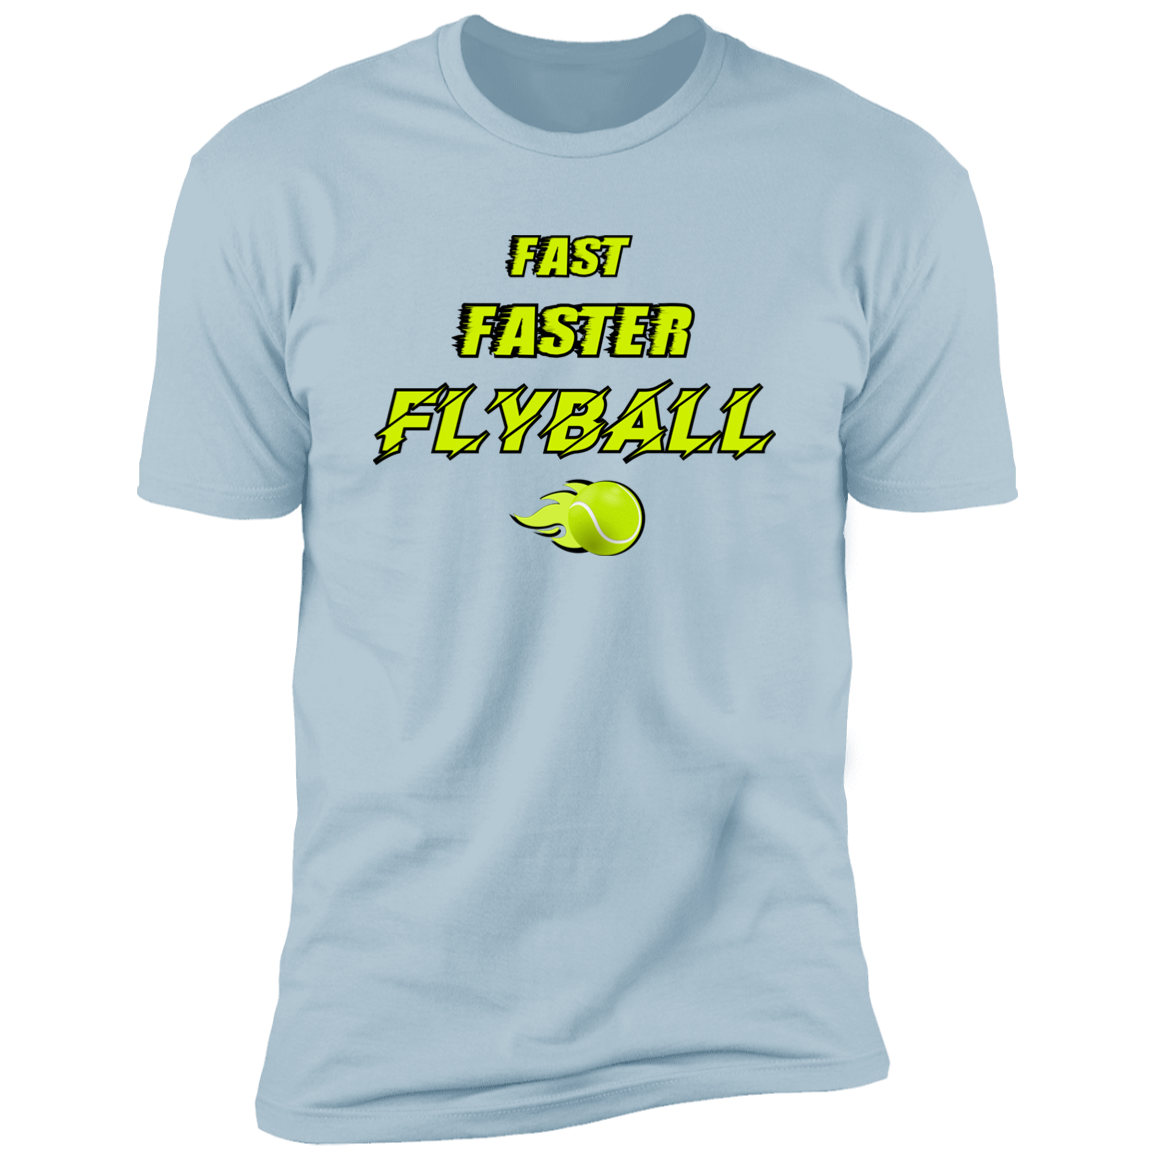 Fast Faster Flyball Dog T-shirt, sporting dog t-shirt, flyball t-shirt, in light blue